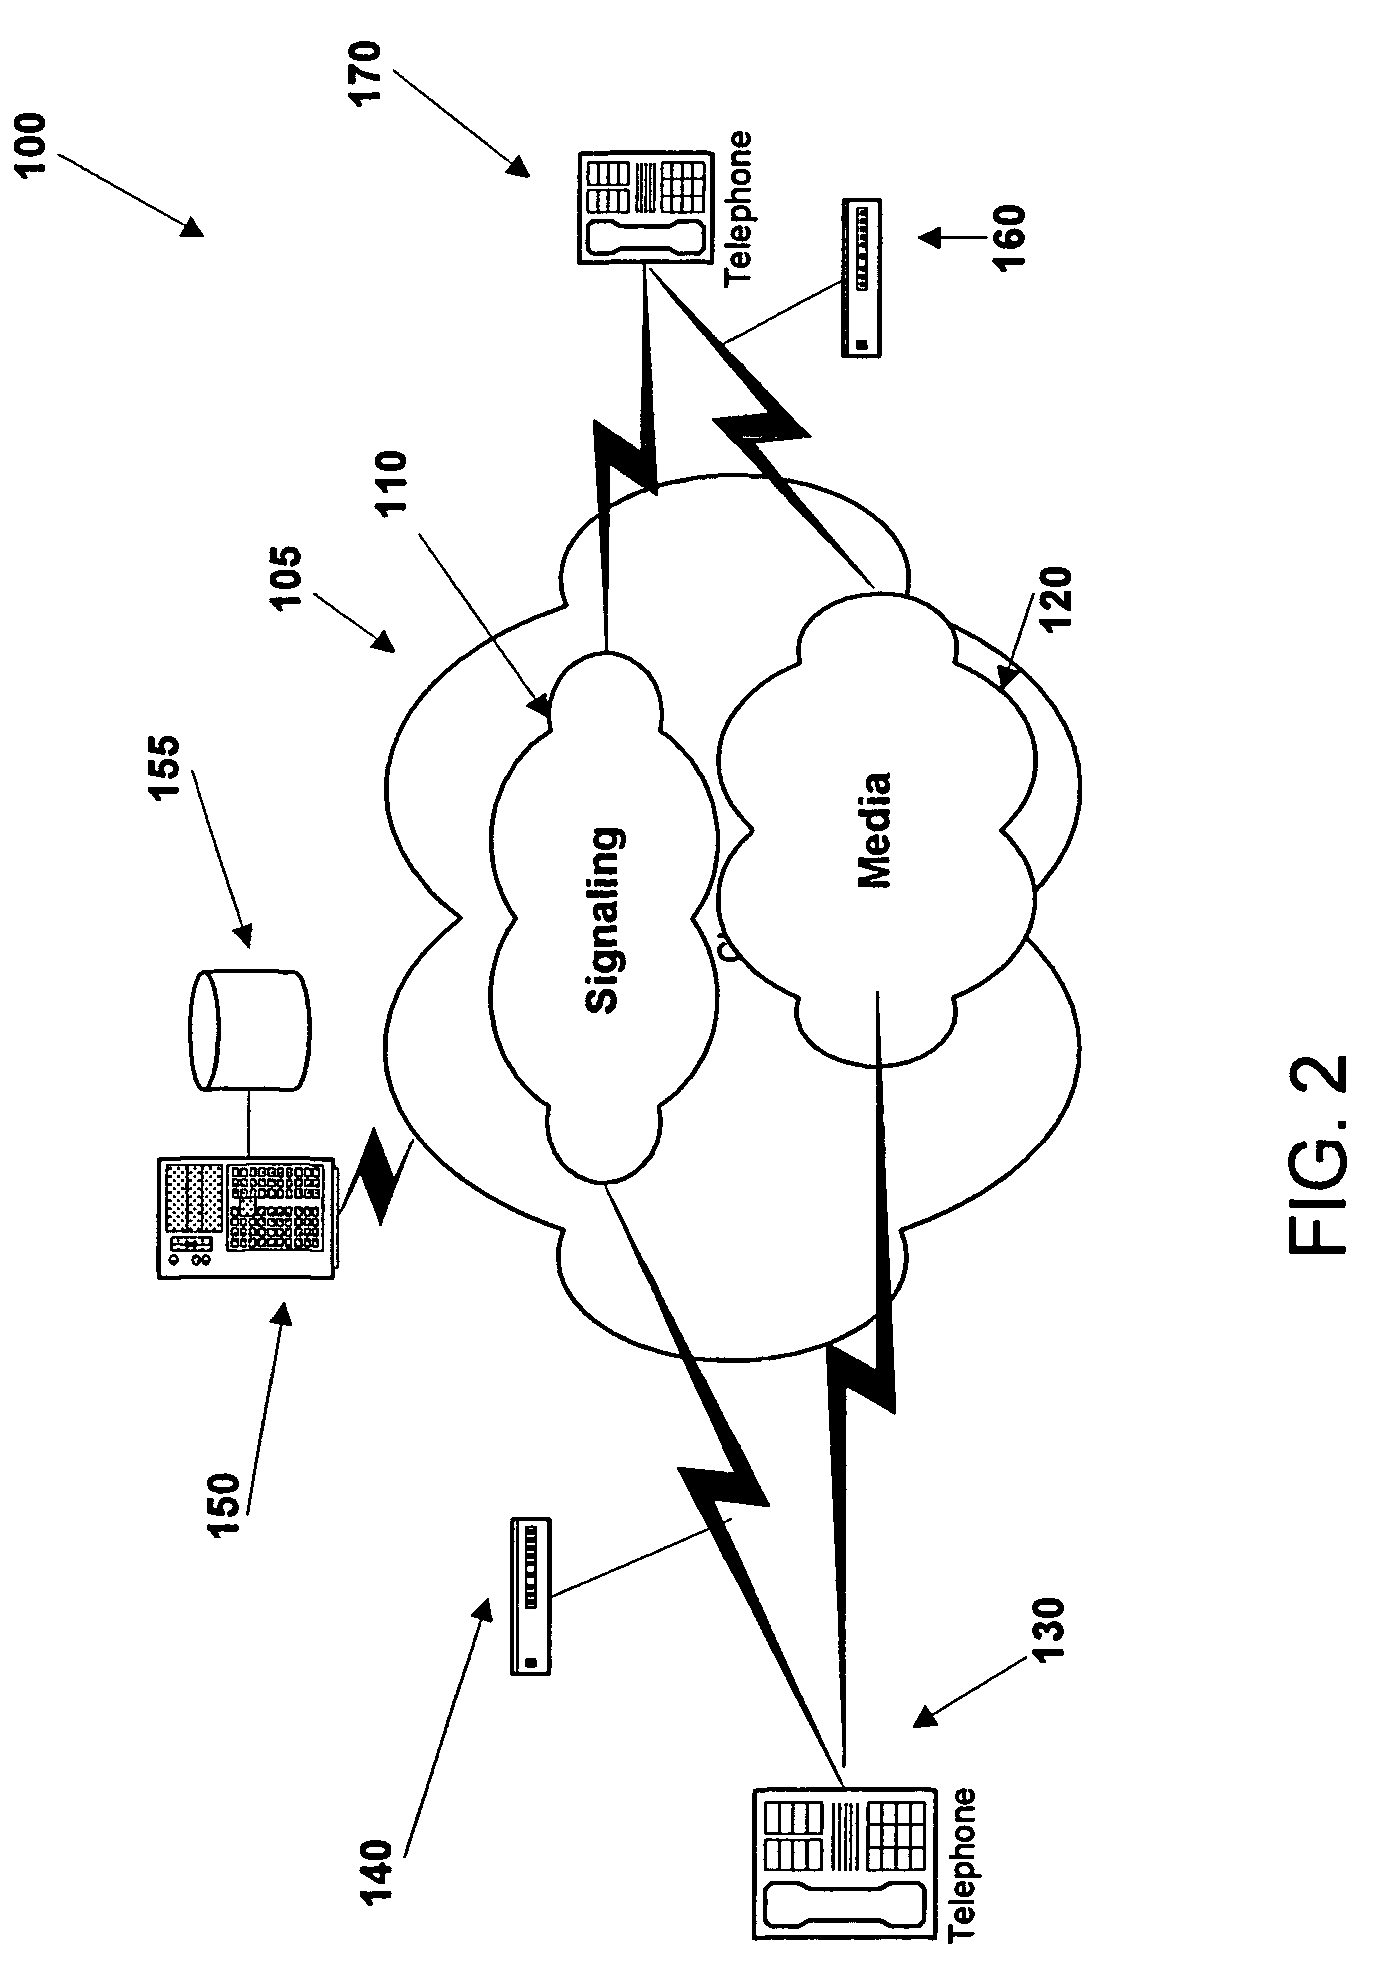 Systems and methods for collecting and disbursing participant identifying data